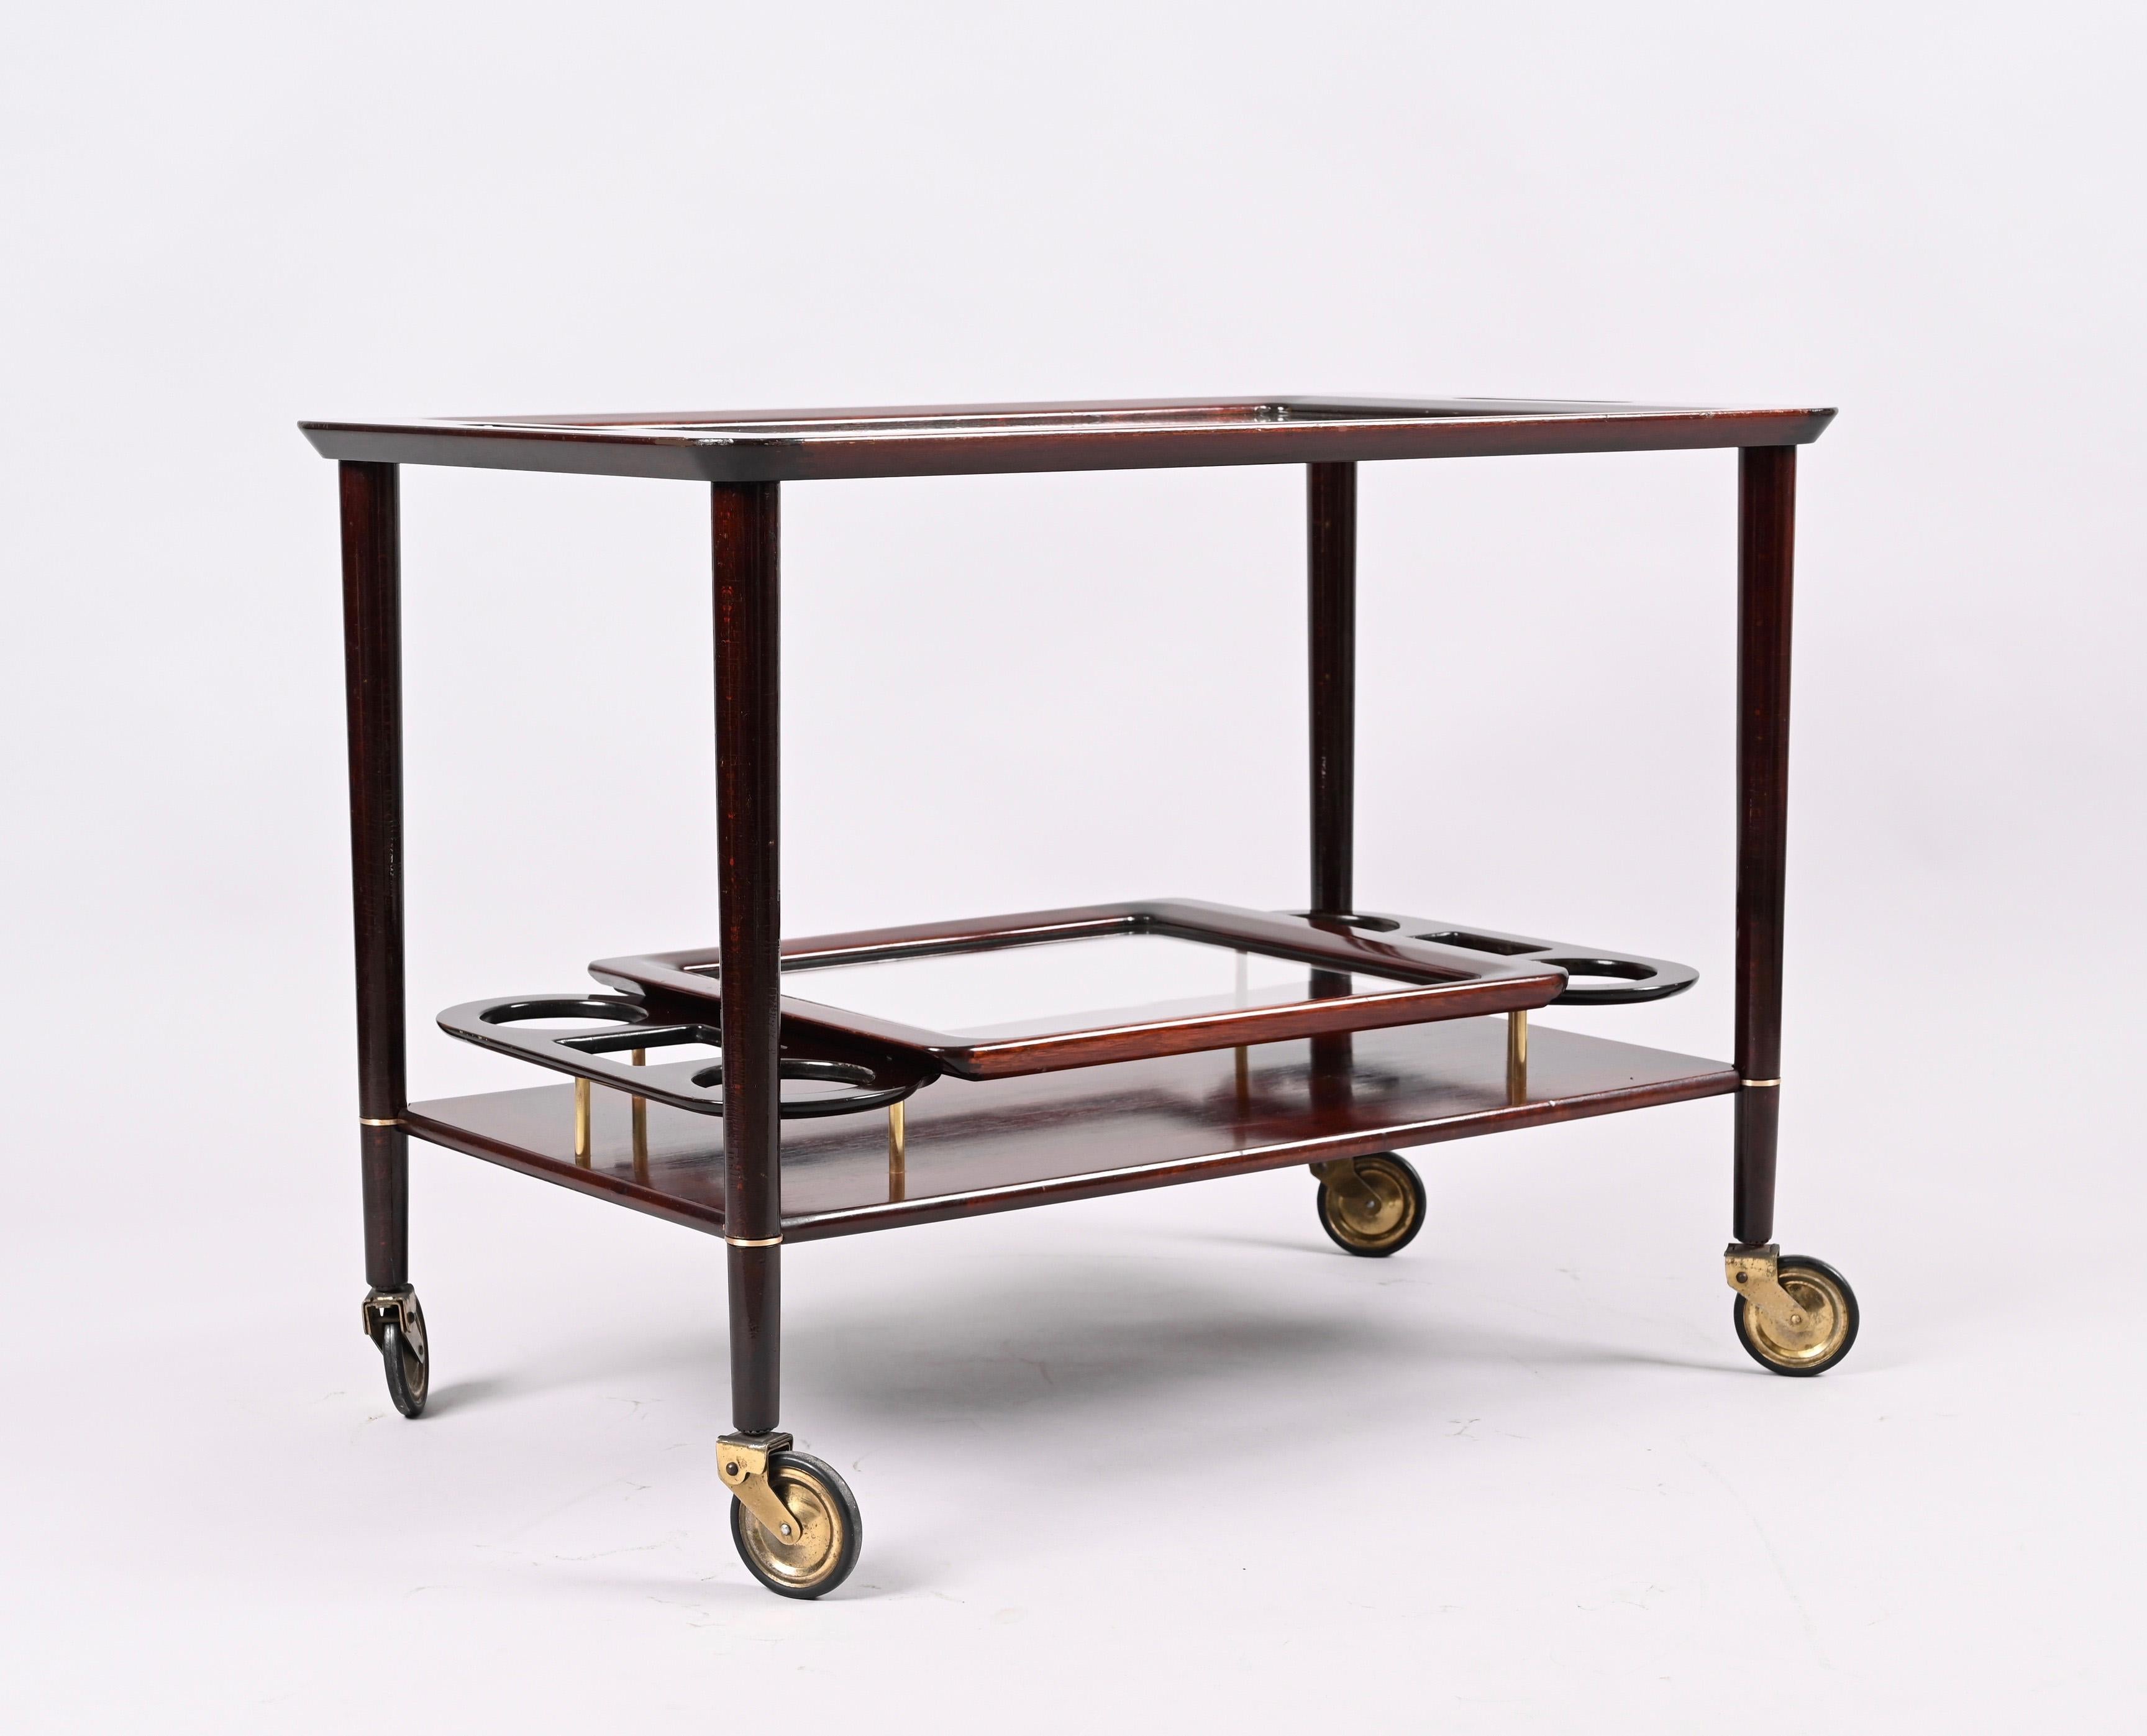 Brass Cesare Lacca Midcentury Wood Italian Bar Cart with Glass Serving Trays, 1950s For Sale